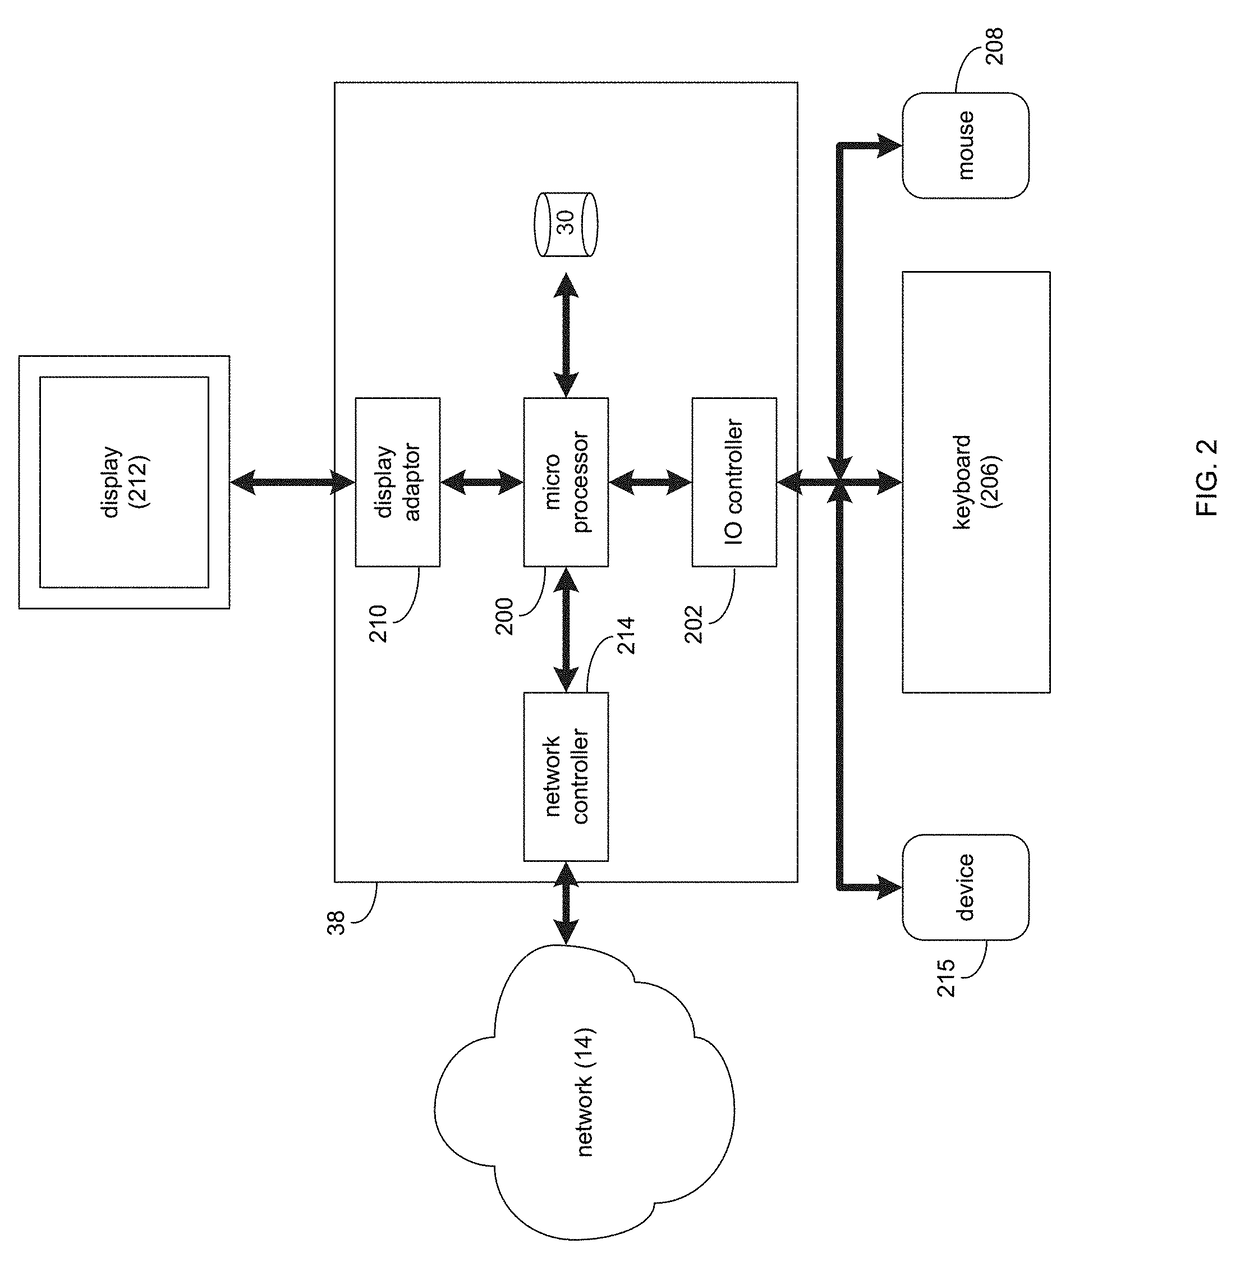 System and method for dynamic runtime merging of real time streaming operator environments